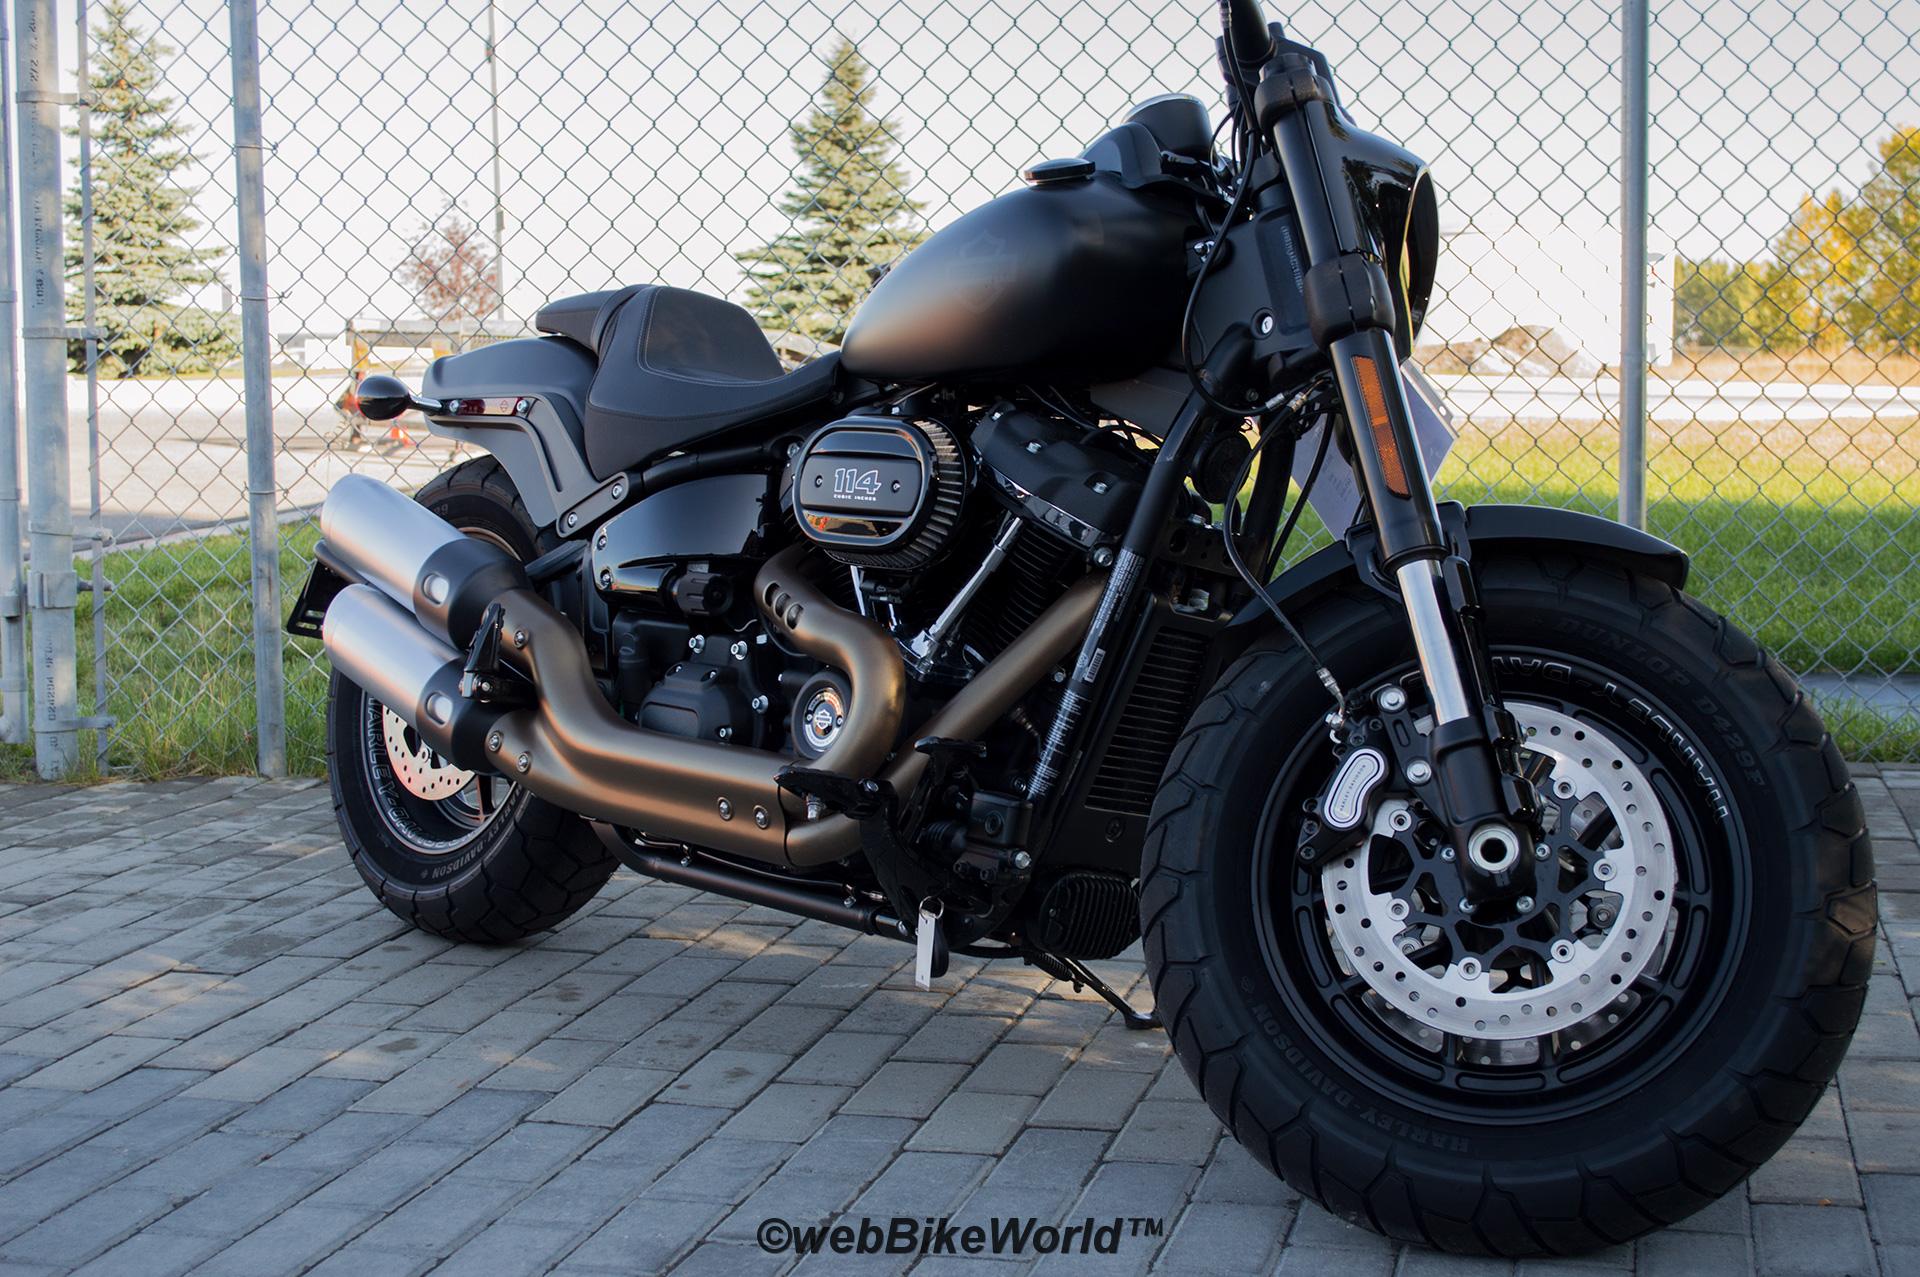 2019 Fat Bob 114 For Sale Promotion Off53